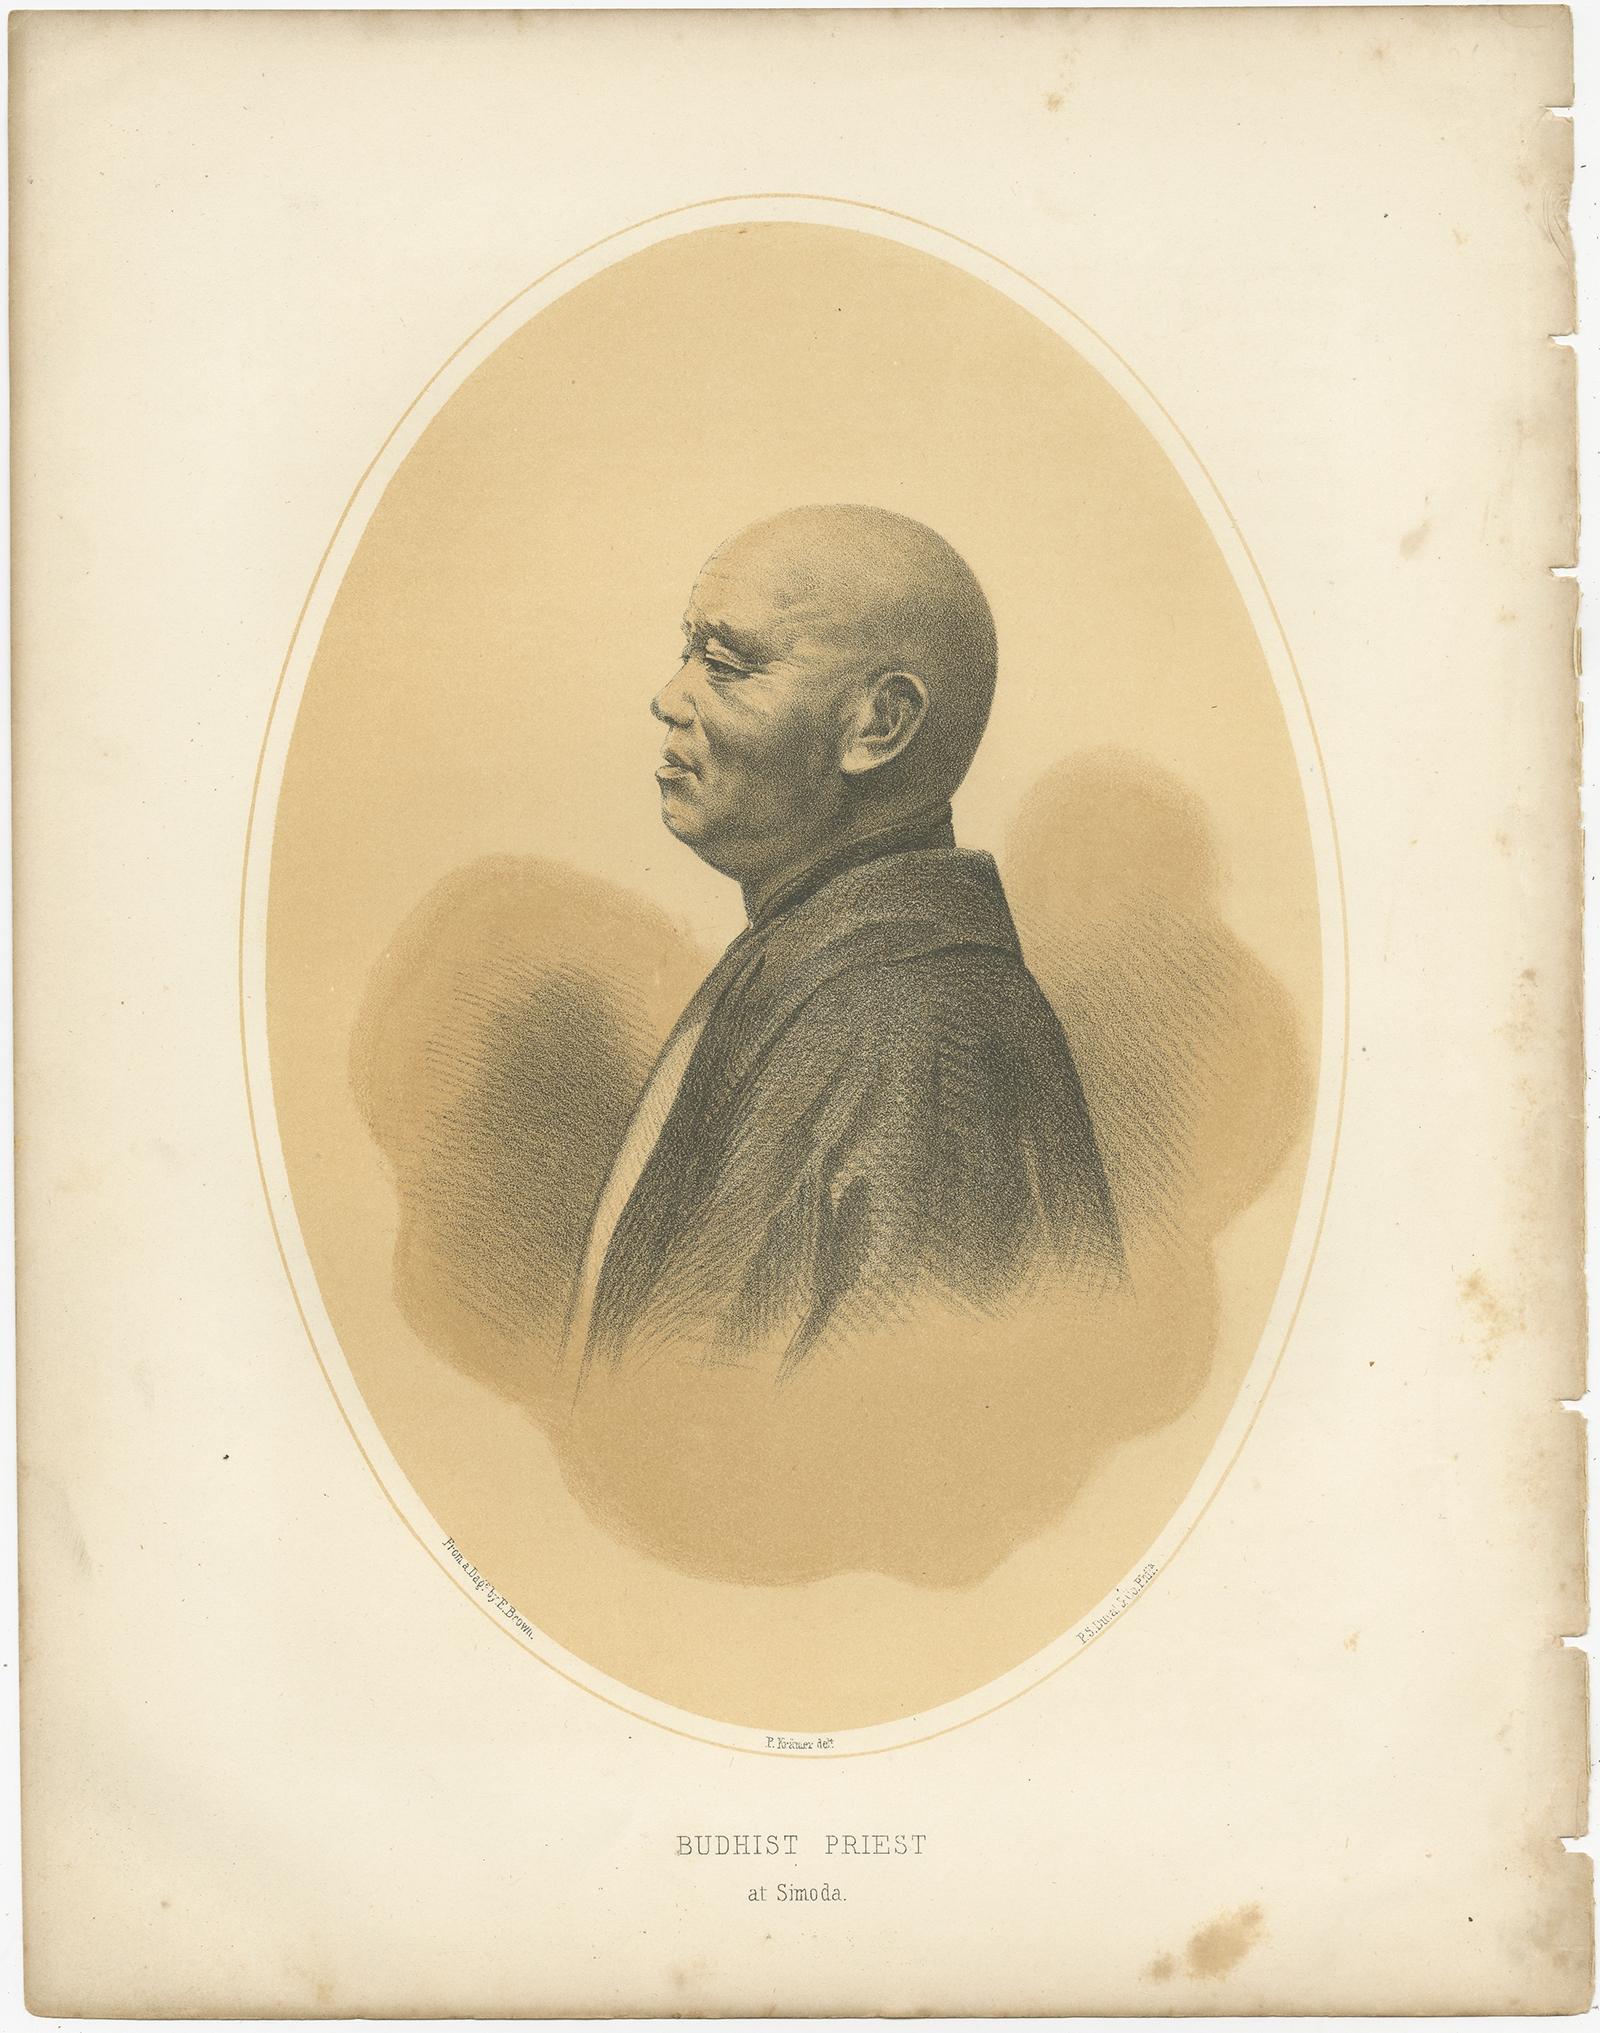 Antique print titled 'Budhist Priest at Simoda'. 

Lithograph of a Buddhist priest of Shimoda, Japan. This print originates from 'Narrative of the expedition of an American squadron to the China seas and Japan, performed in the years 1852, 1853,